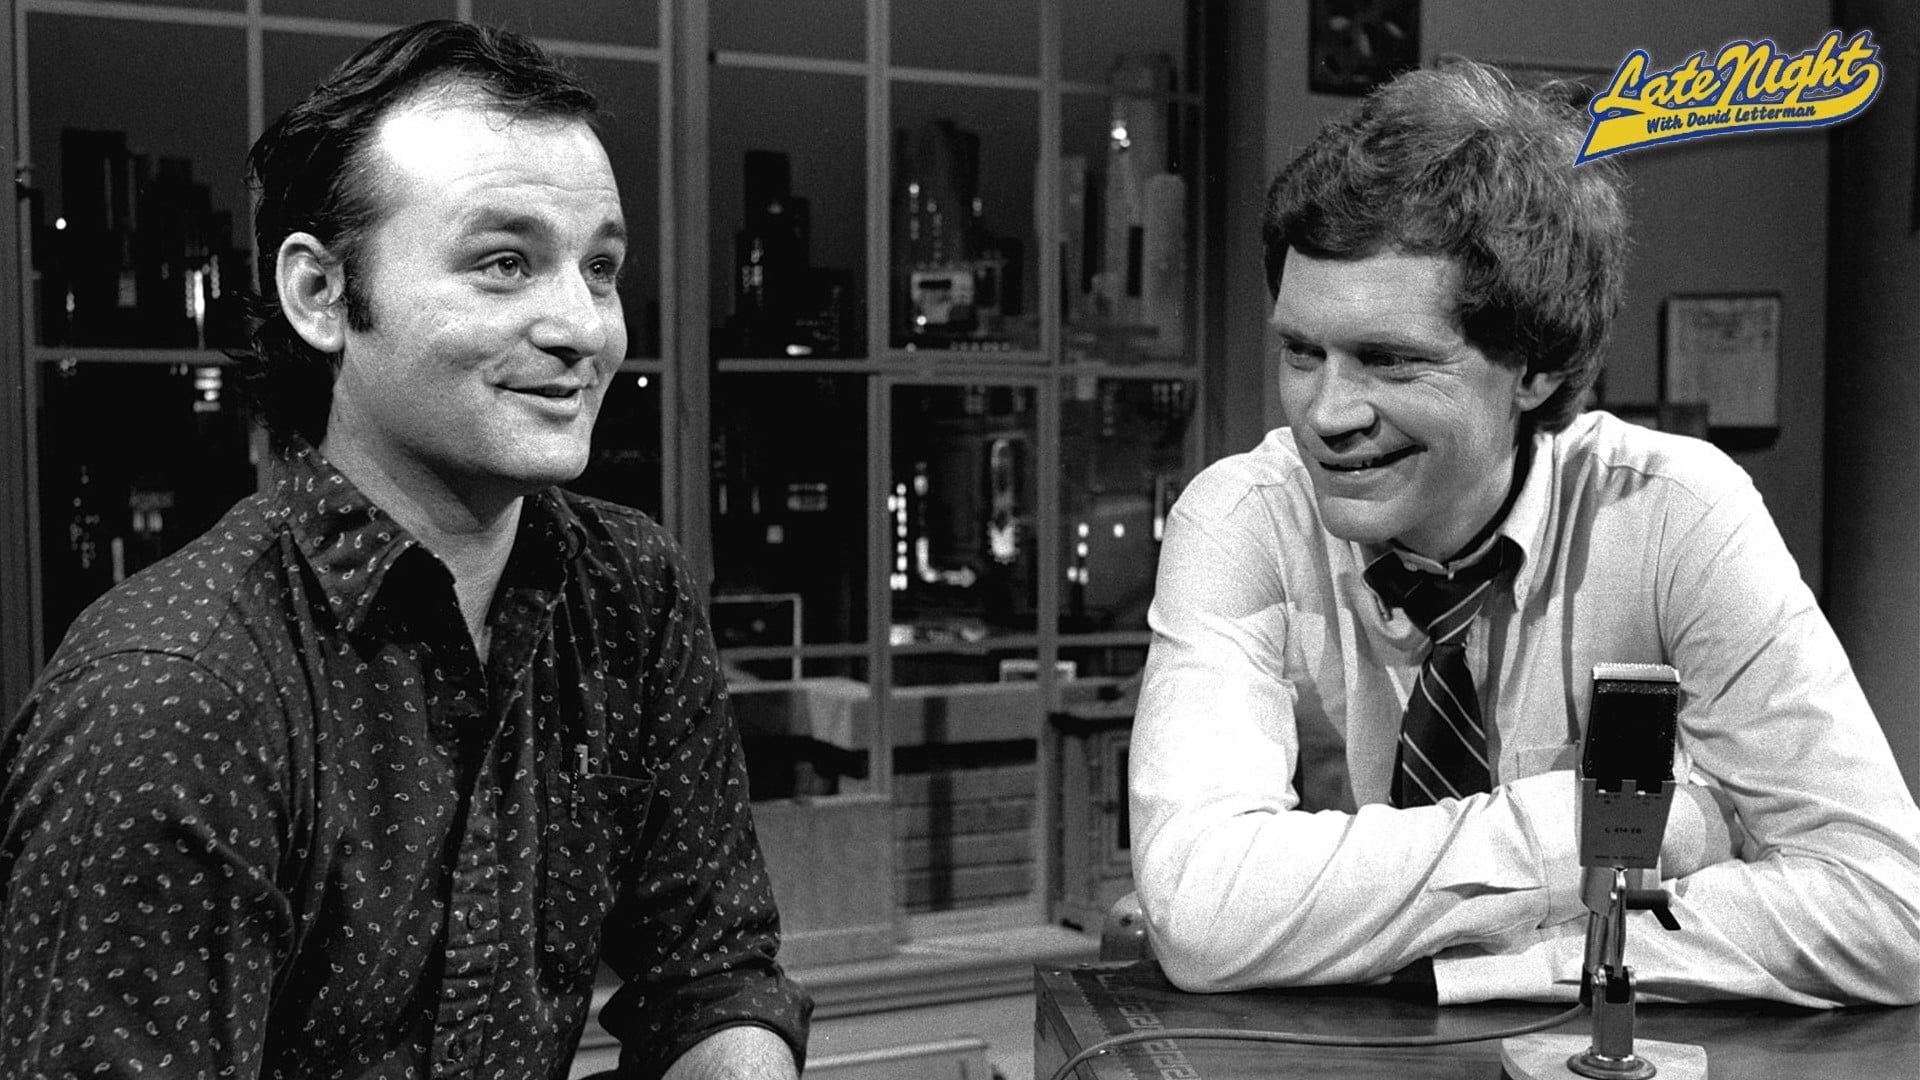 Late Night with David Letterman (1970)